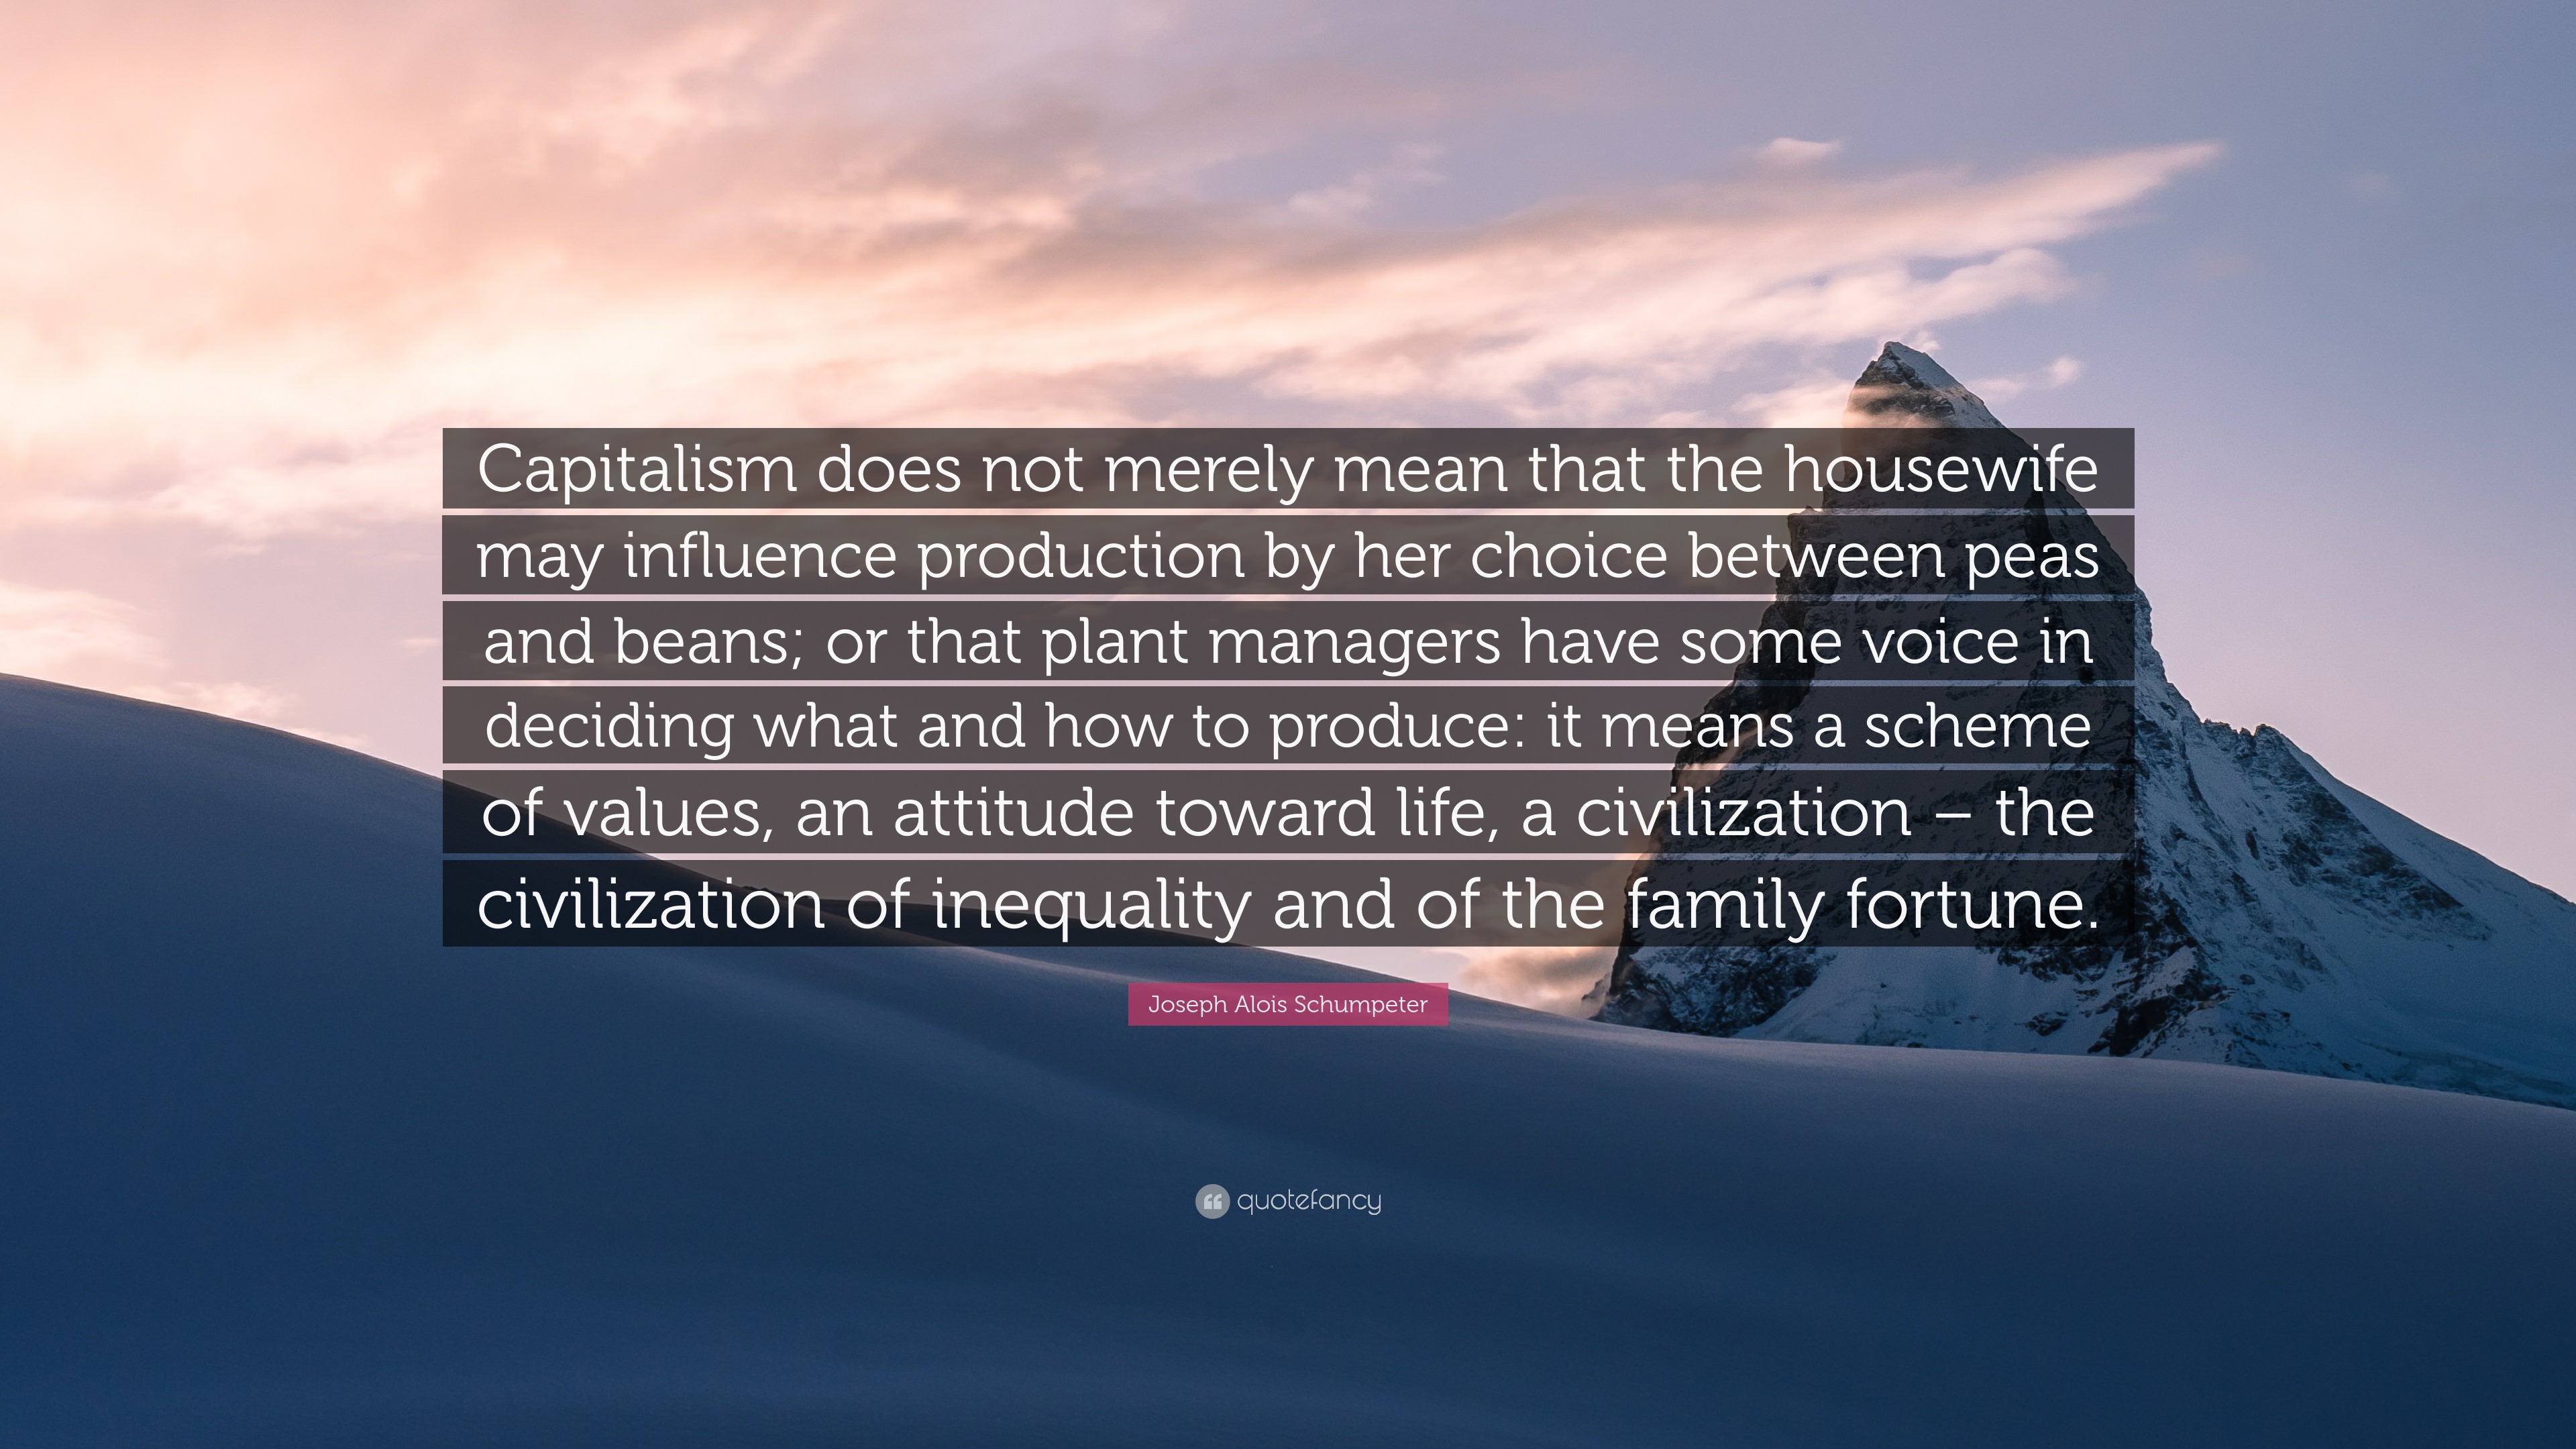 Joseph Alois Schumpeter Quote: “Capitalism does not merely mean that the  housewife may influence production by her choice between peas and beans; or  tha”